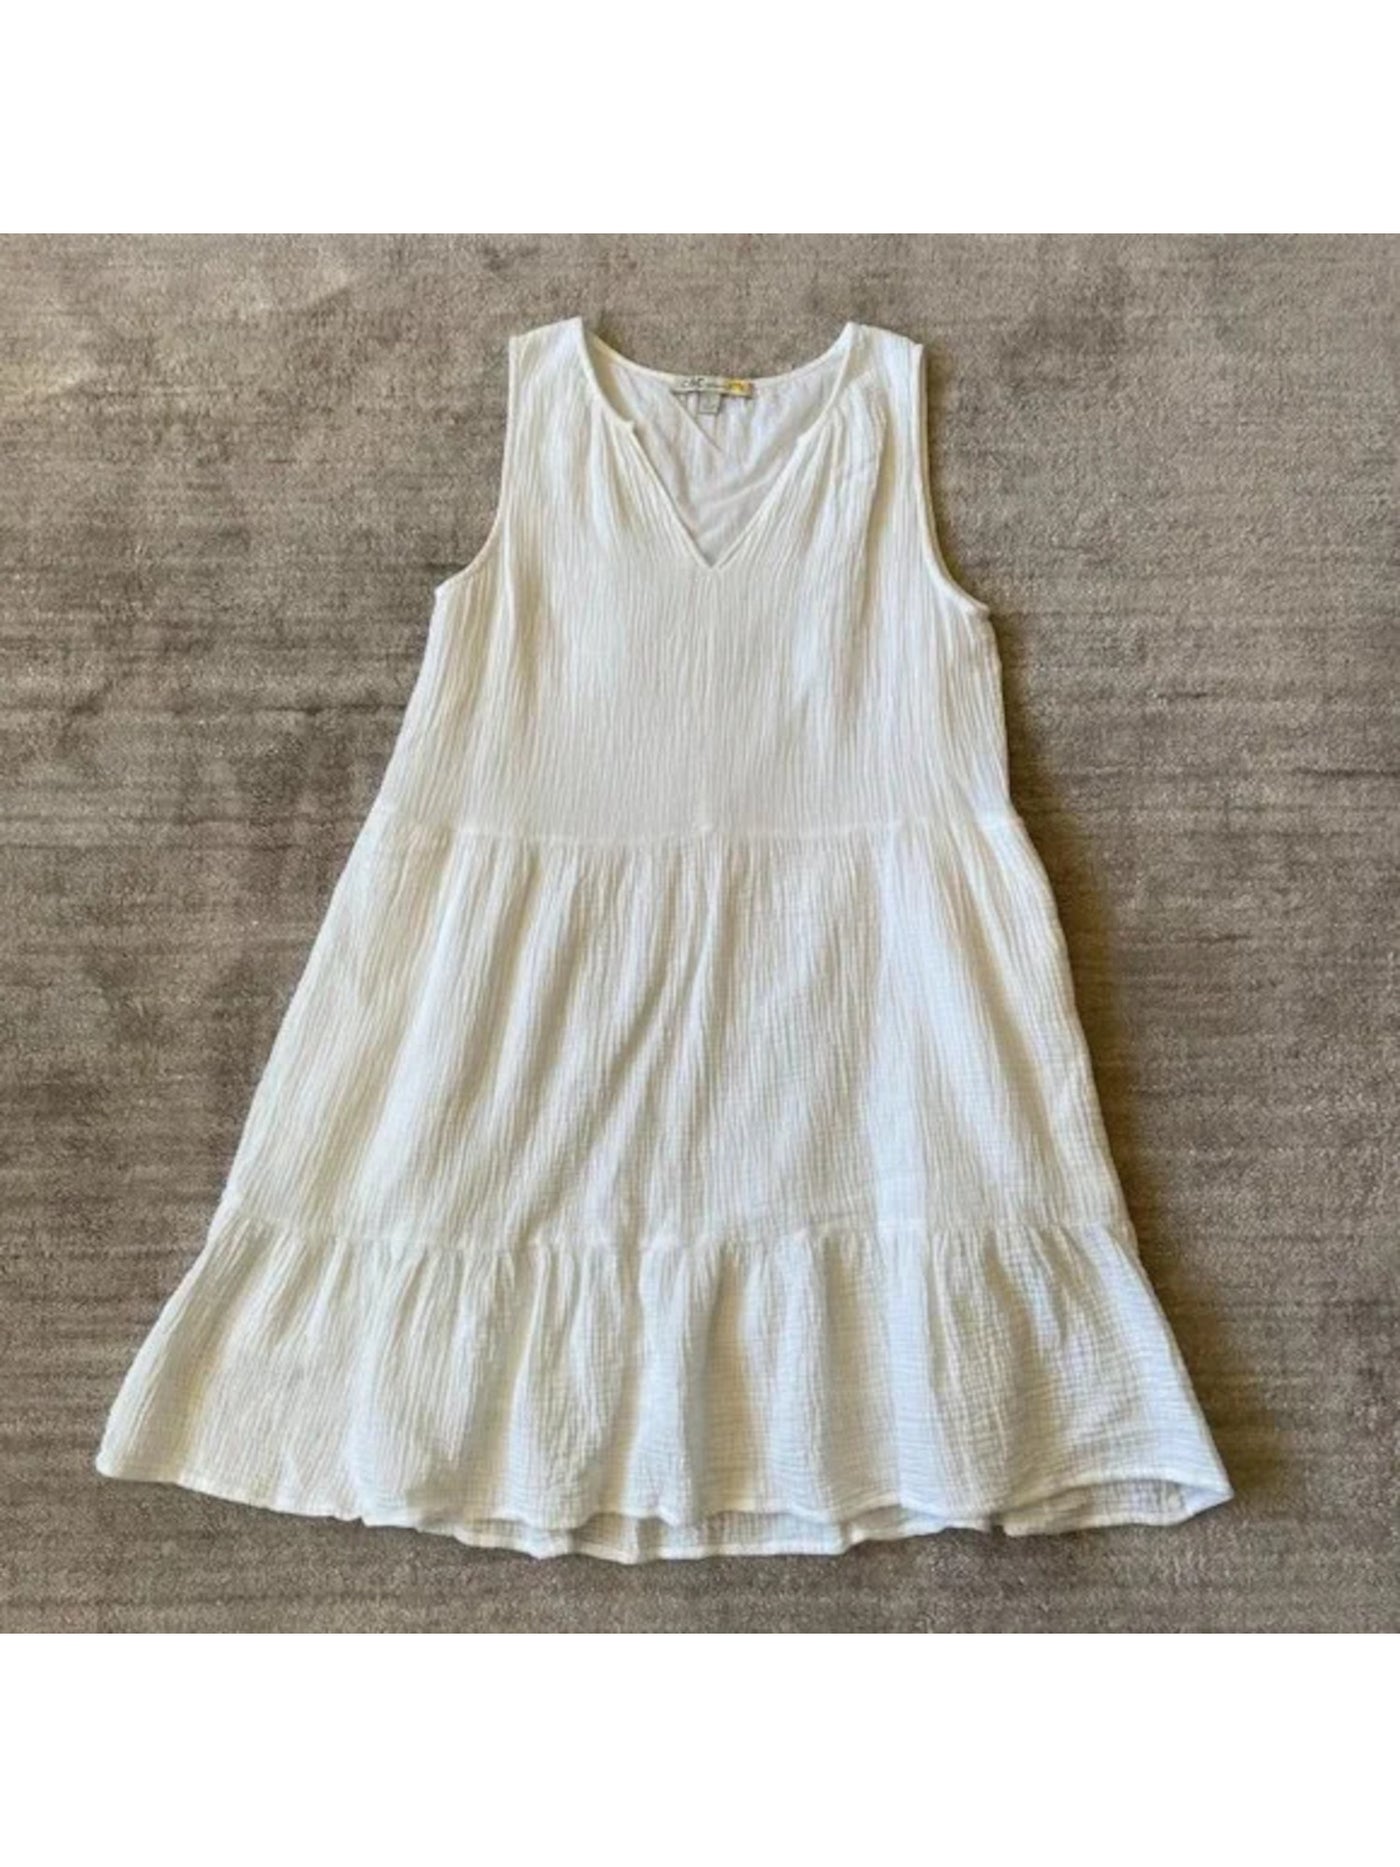 C AND C CALIFORNIA Womens White Textured Lined Tiered Sleeveless V Neck Below The Knee Shift Dress S